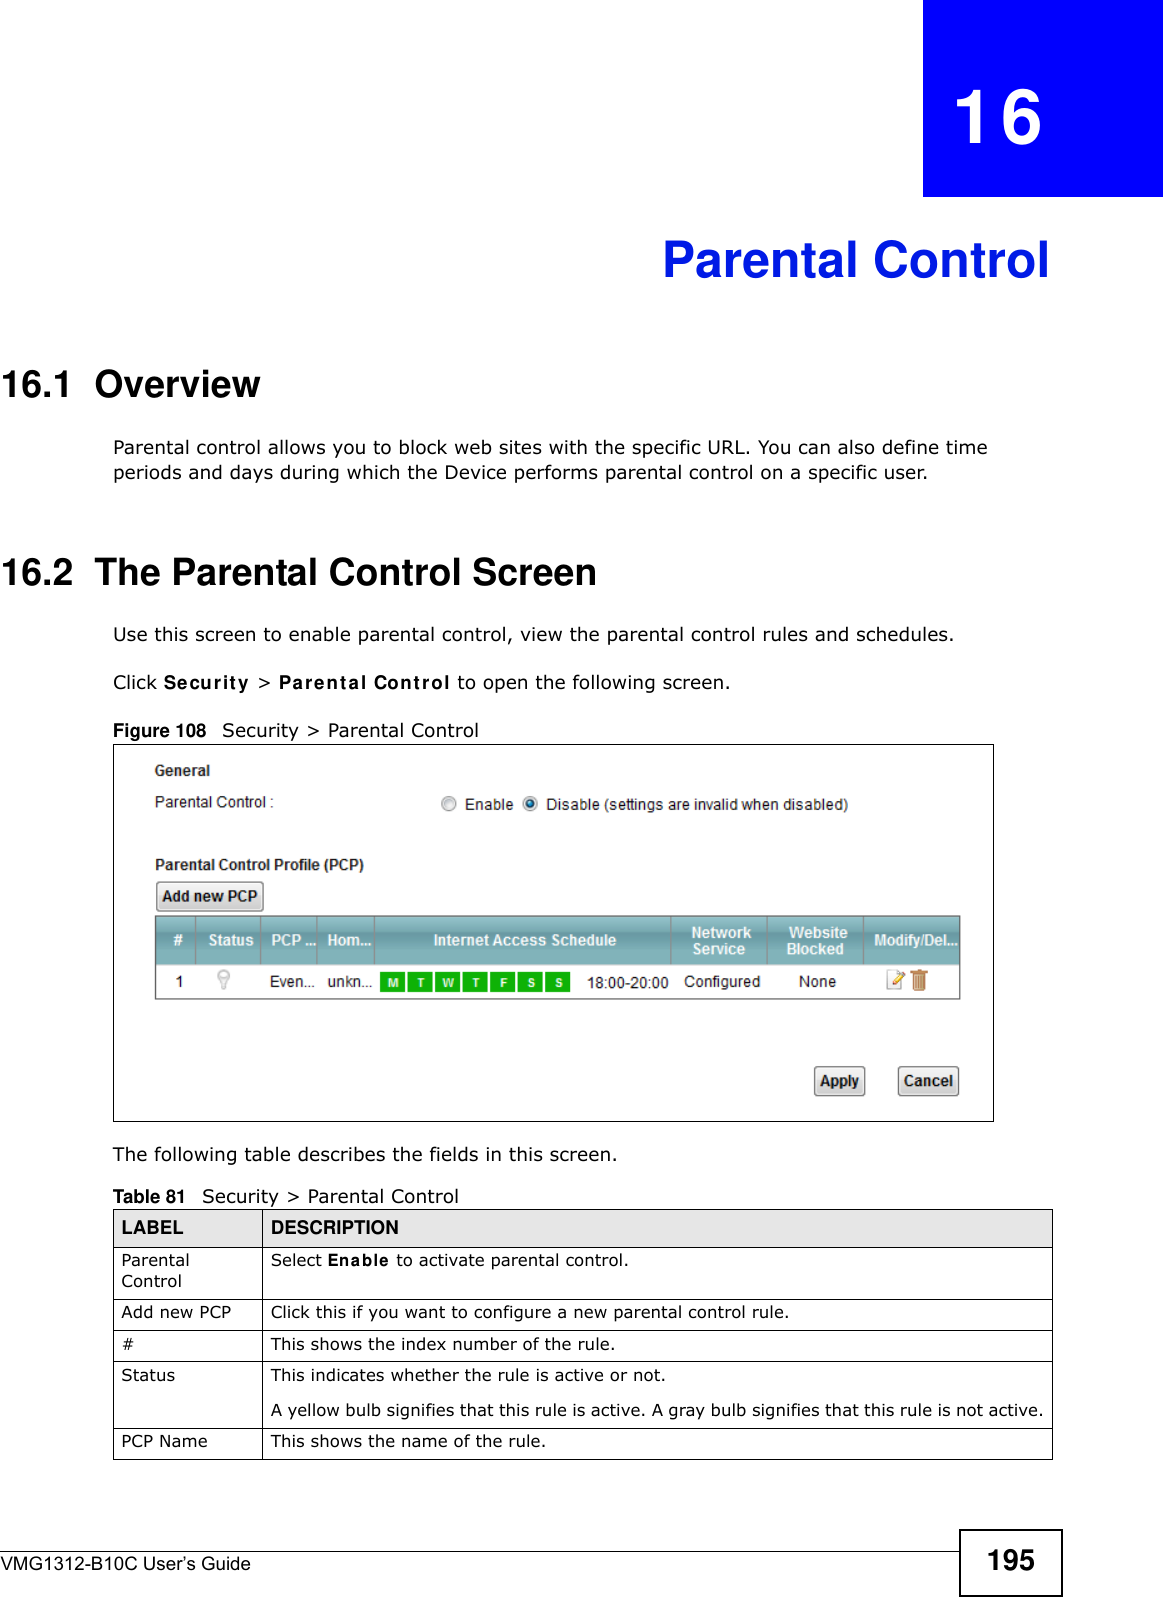 VMG1312-B10C User’s Guide 195CHAPTER   16Parental Control16.1  OverviewParental control allows you to block web sites with the specific URL. You can also define time periods and days during which the Device performs parental control on a specific user. 16.2  The Parental Control ScreenUse this screen to enable parental control, view the parental control rules and schedules.Click Se cur it y  &gt; Pa r e nt al Cont r ol to open the following screen. Figure 108   Security &gt; Parental Control The following table describes the fields in this screen. Table 81   Security &gt; Parental ControlLABEL DESCRIPTIONParental ControlSelect Enable  to activate parental control.Add new PCP Click this if you want to configure a new parental control rule.#This shows the index number of the rule.Status This indicates whether the rule is active or not.A yellow bulb signifies that this rule is active. A gray bulb signifies that this rule is not active.PCP Name This shows the name of the rule.